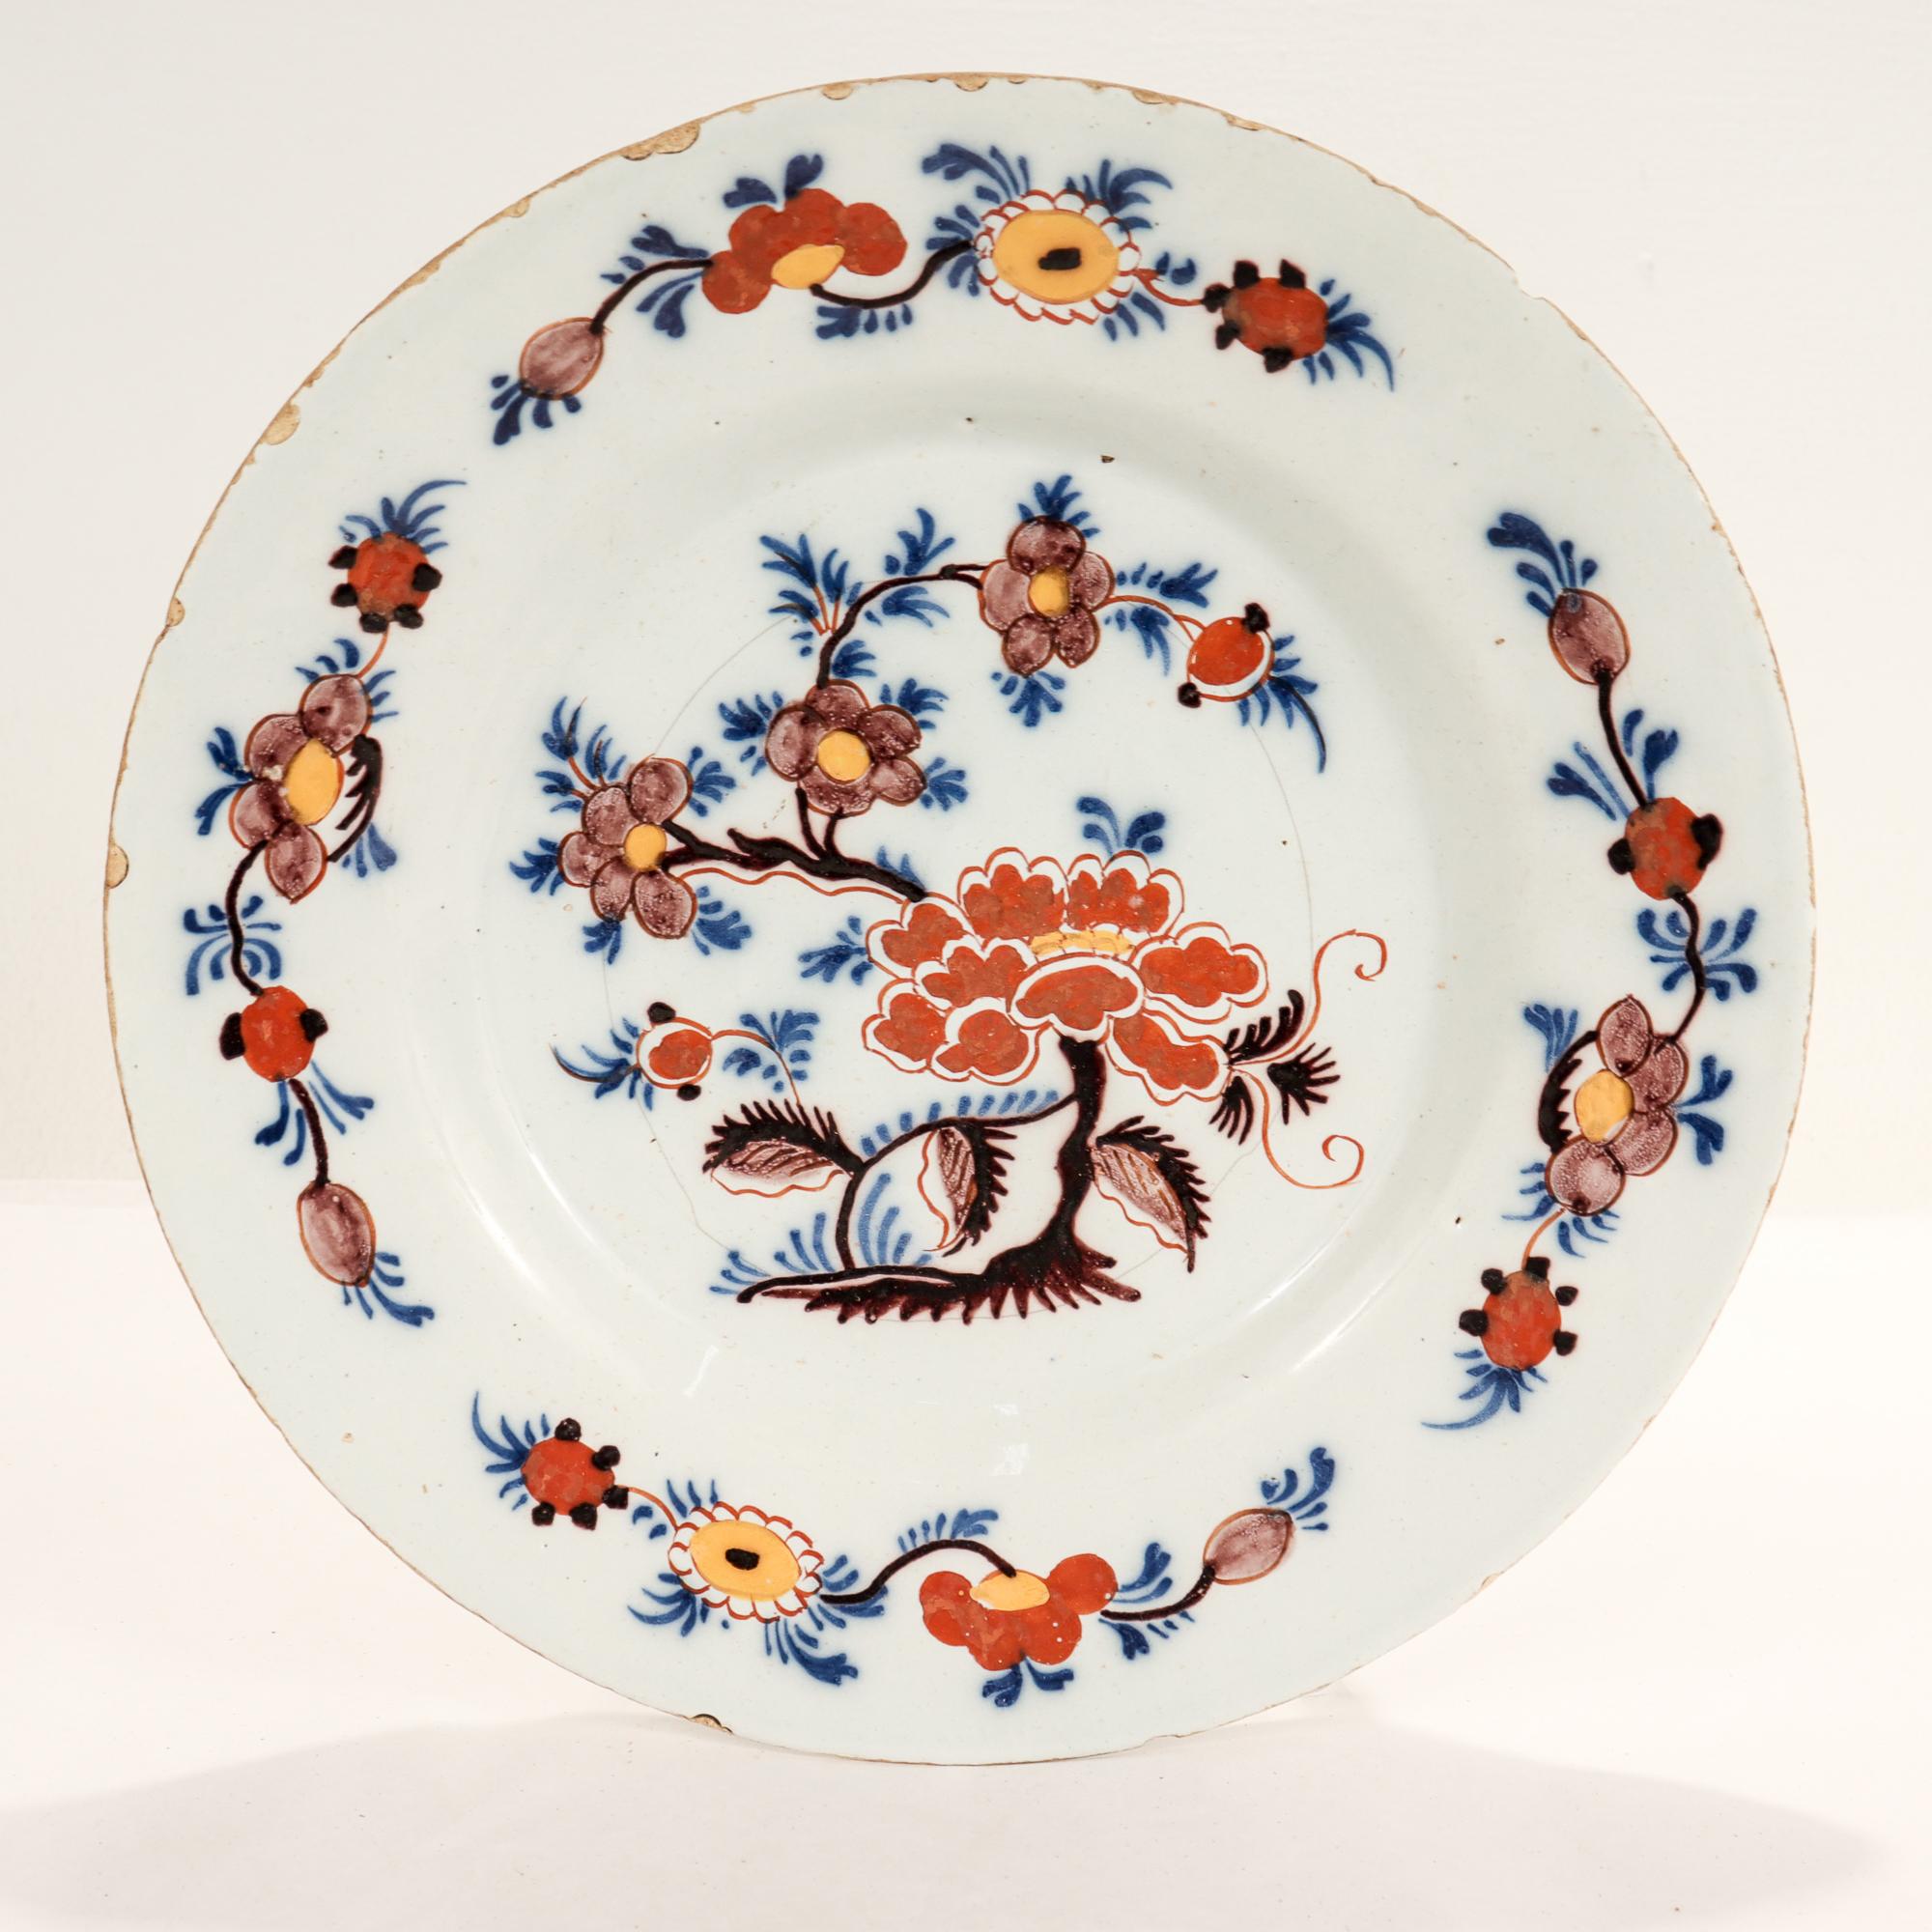 A fine antique 18th century Dutch Delft plate.

With painted floral decoration throughout in orange, purple, blue, and yellow.

Simply a wonderful Dutch Delft plate!

Date:
Mid-18th Century

Overall condition:
It is in overall fair,